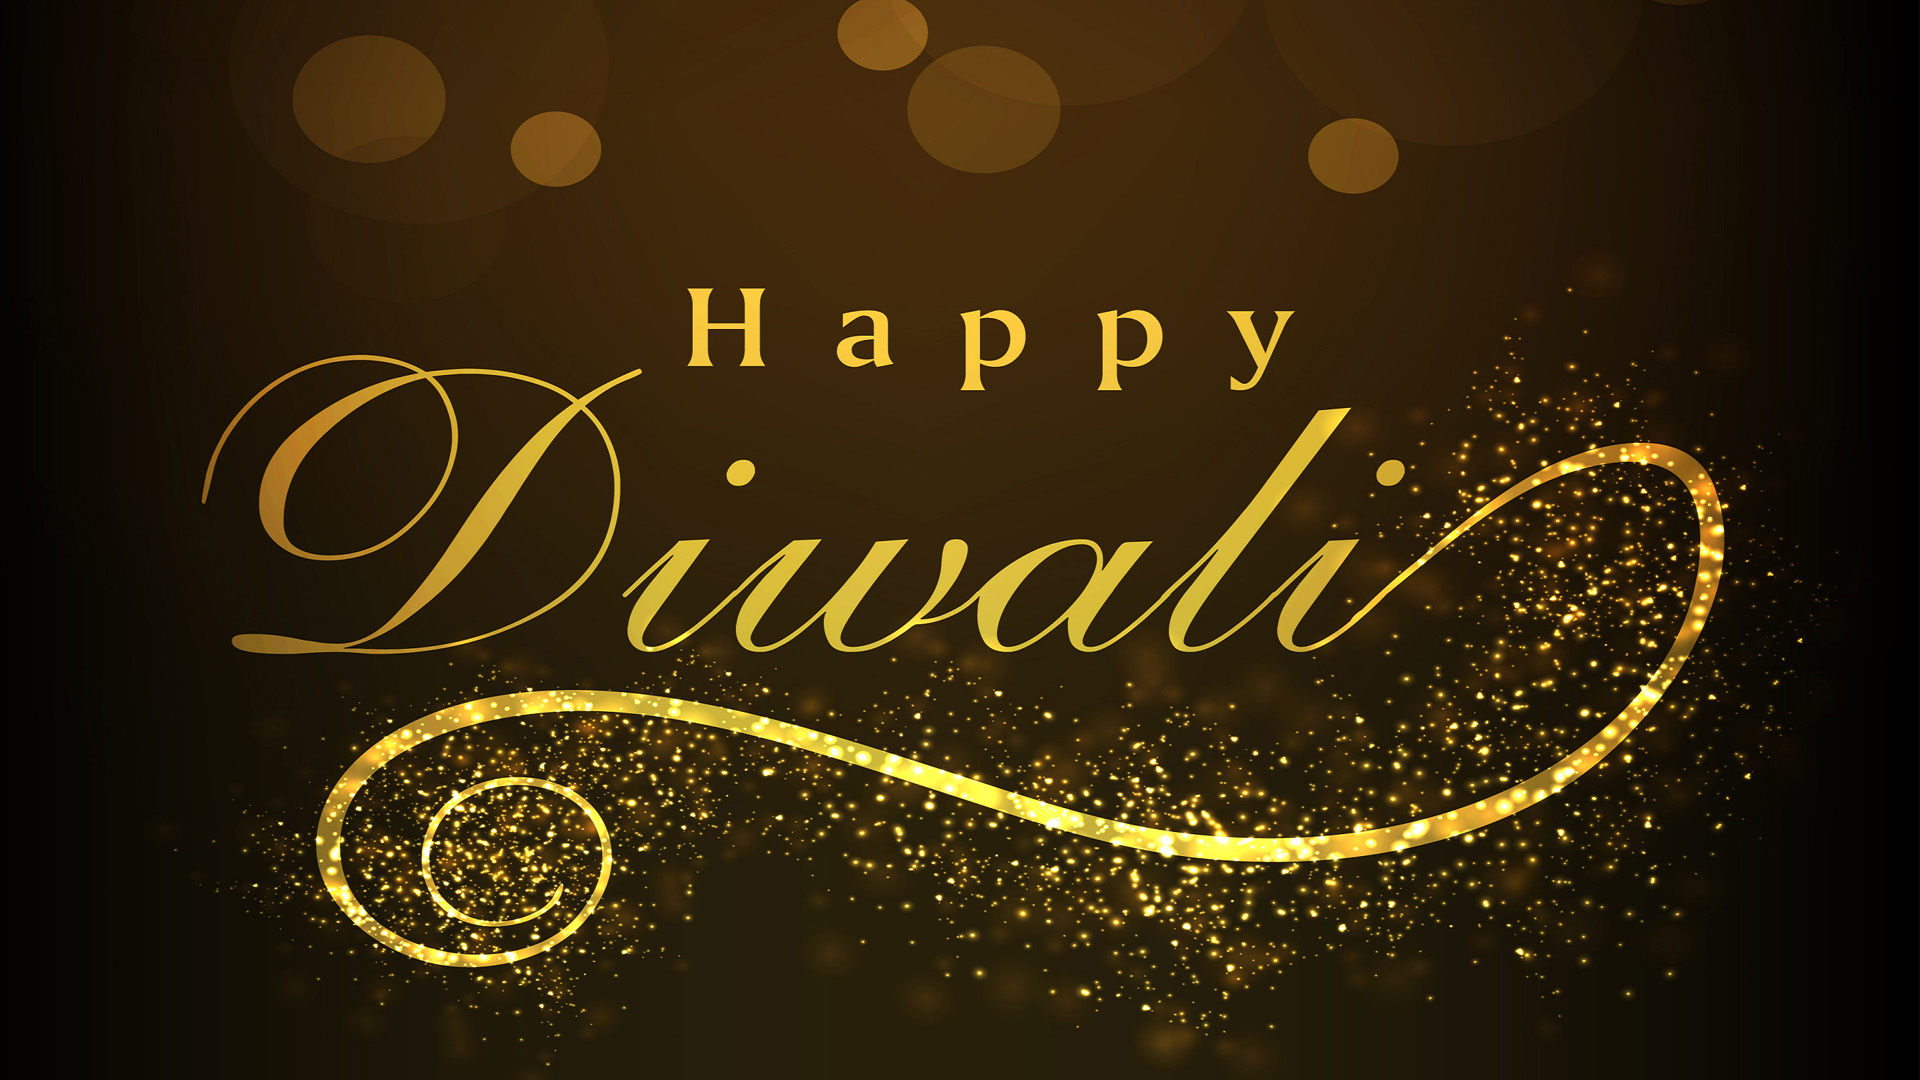 happy-diwali-images-cards-2017-wallpapers